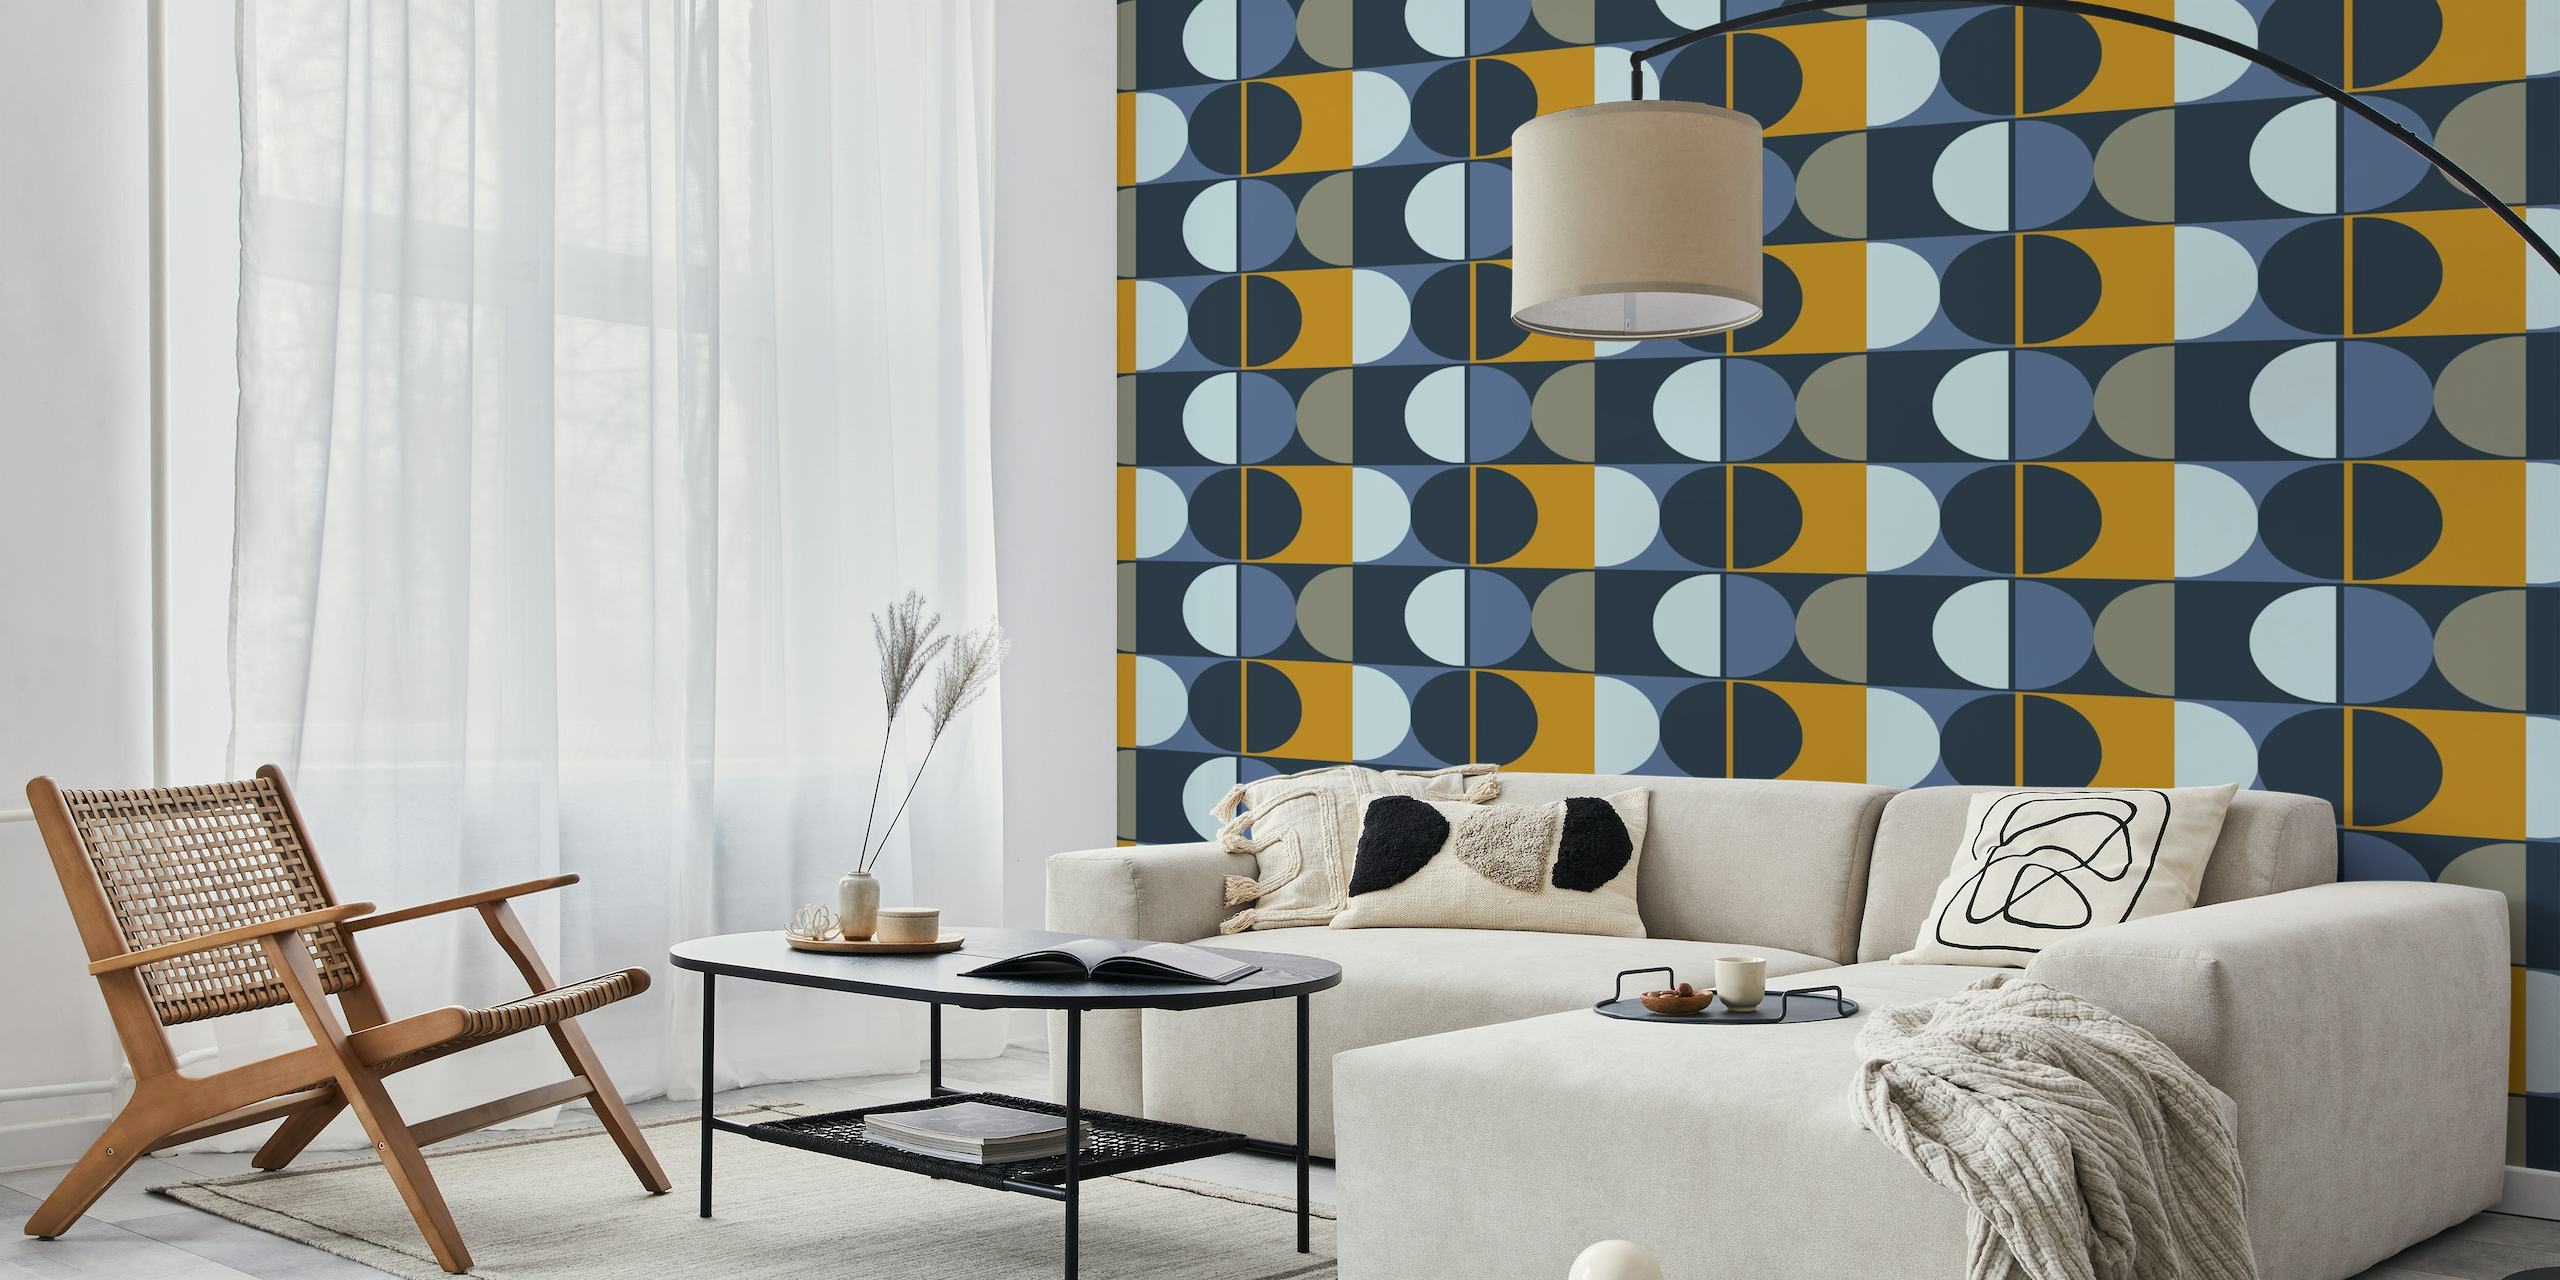 Abstract geometric wall mural with navy, taupe and mustard yellow color scheme inspired by bossa nova